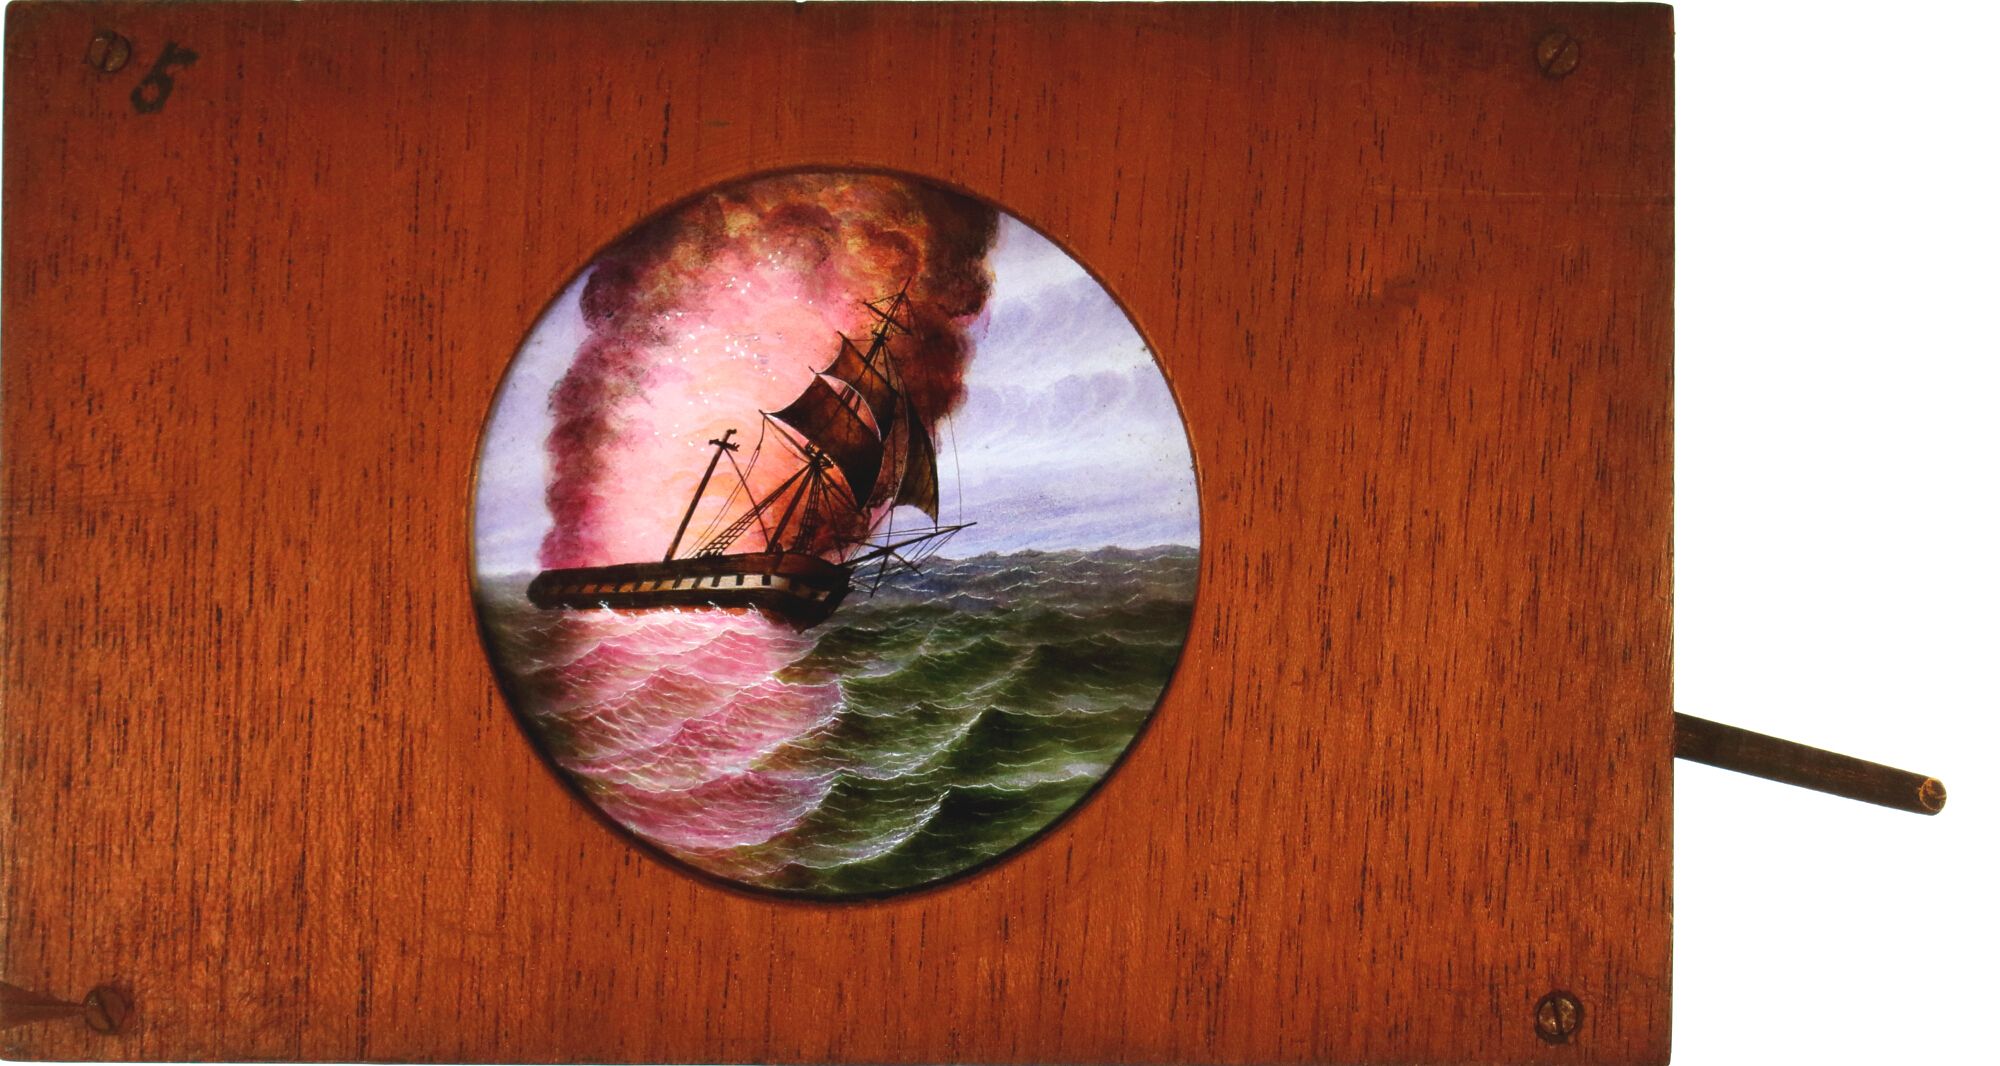 'Ship in storm' [ship rolls in waves] Maker unknown (7 x 4 3/8 x 5/8 inches), single lever Slide 5,' - Image 3 of 6